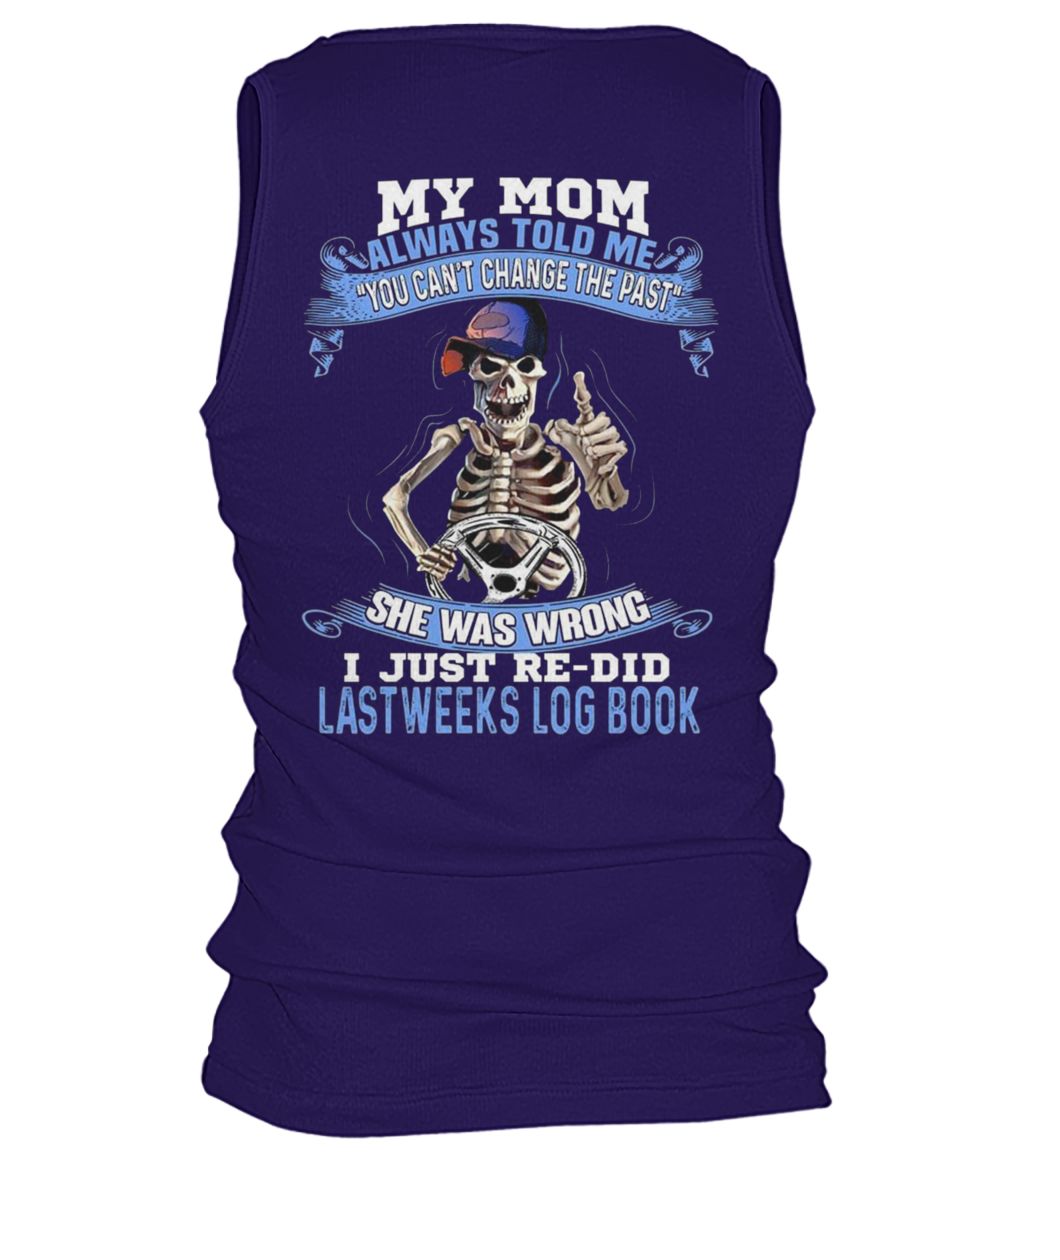 My mom always told me you can't change the past men's tank top